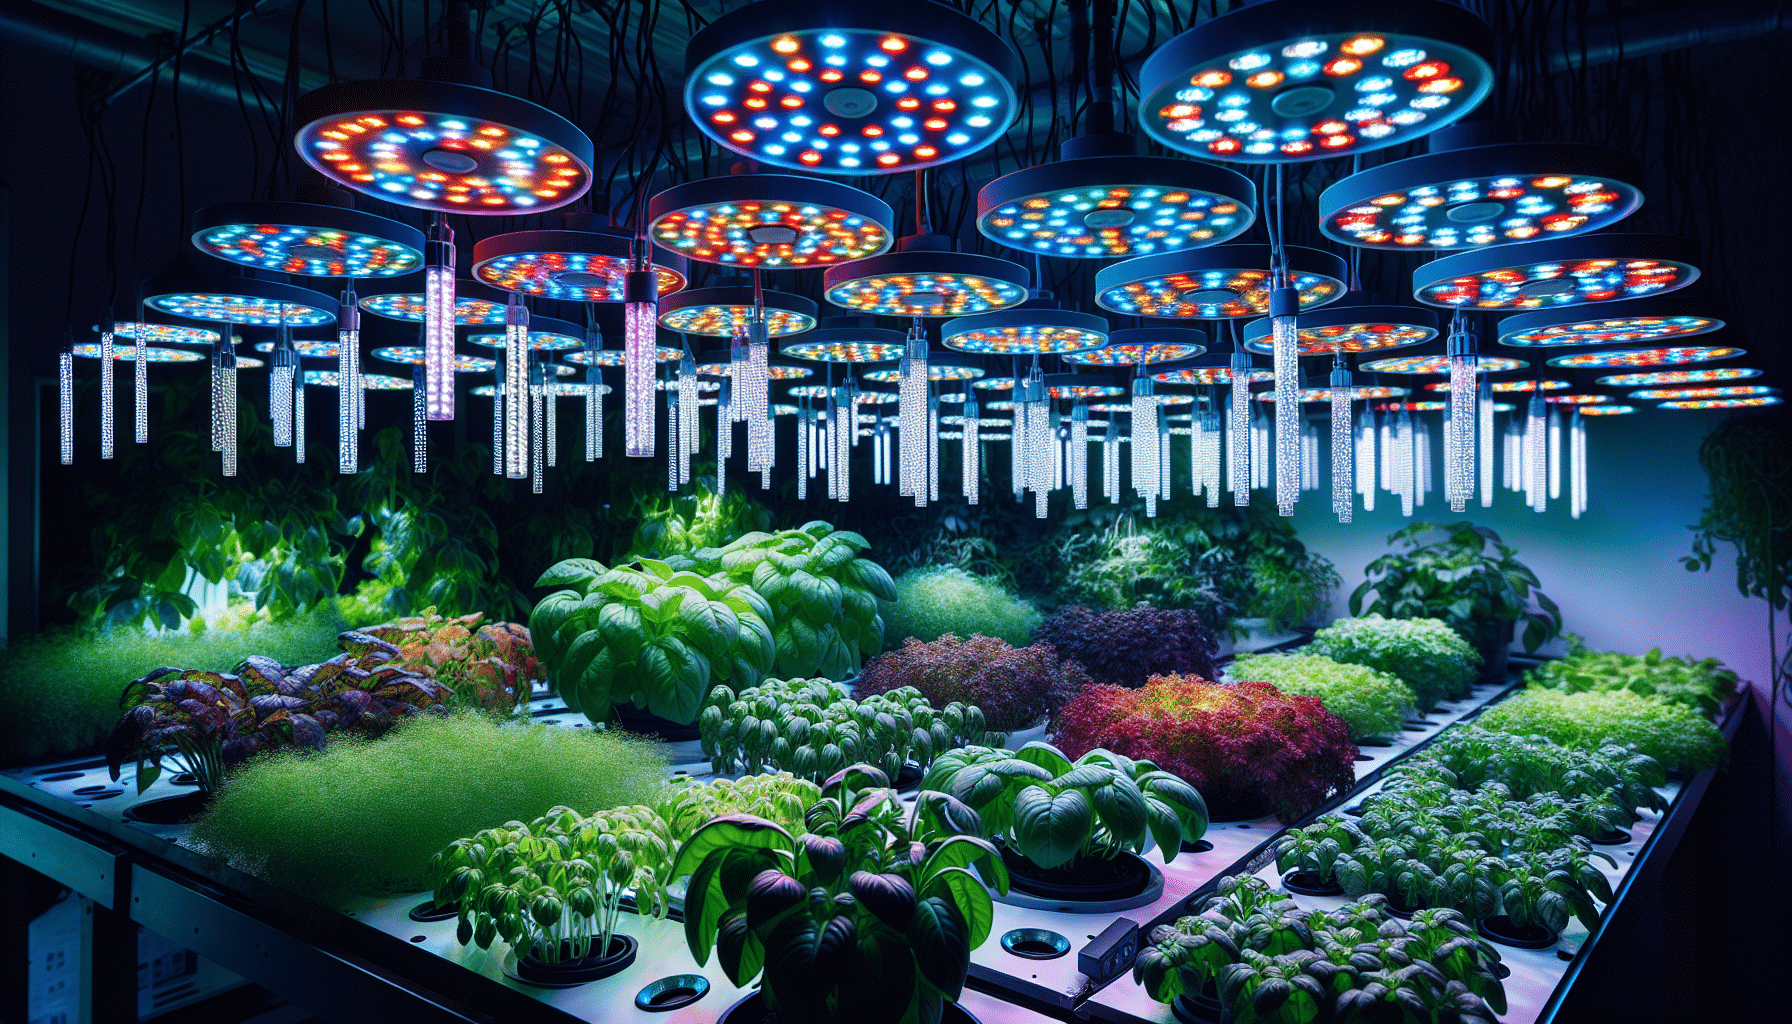 Illustration of LED grow lights for indoor hydroponic system